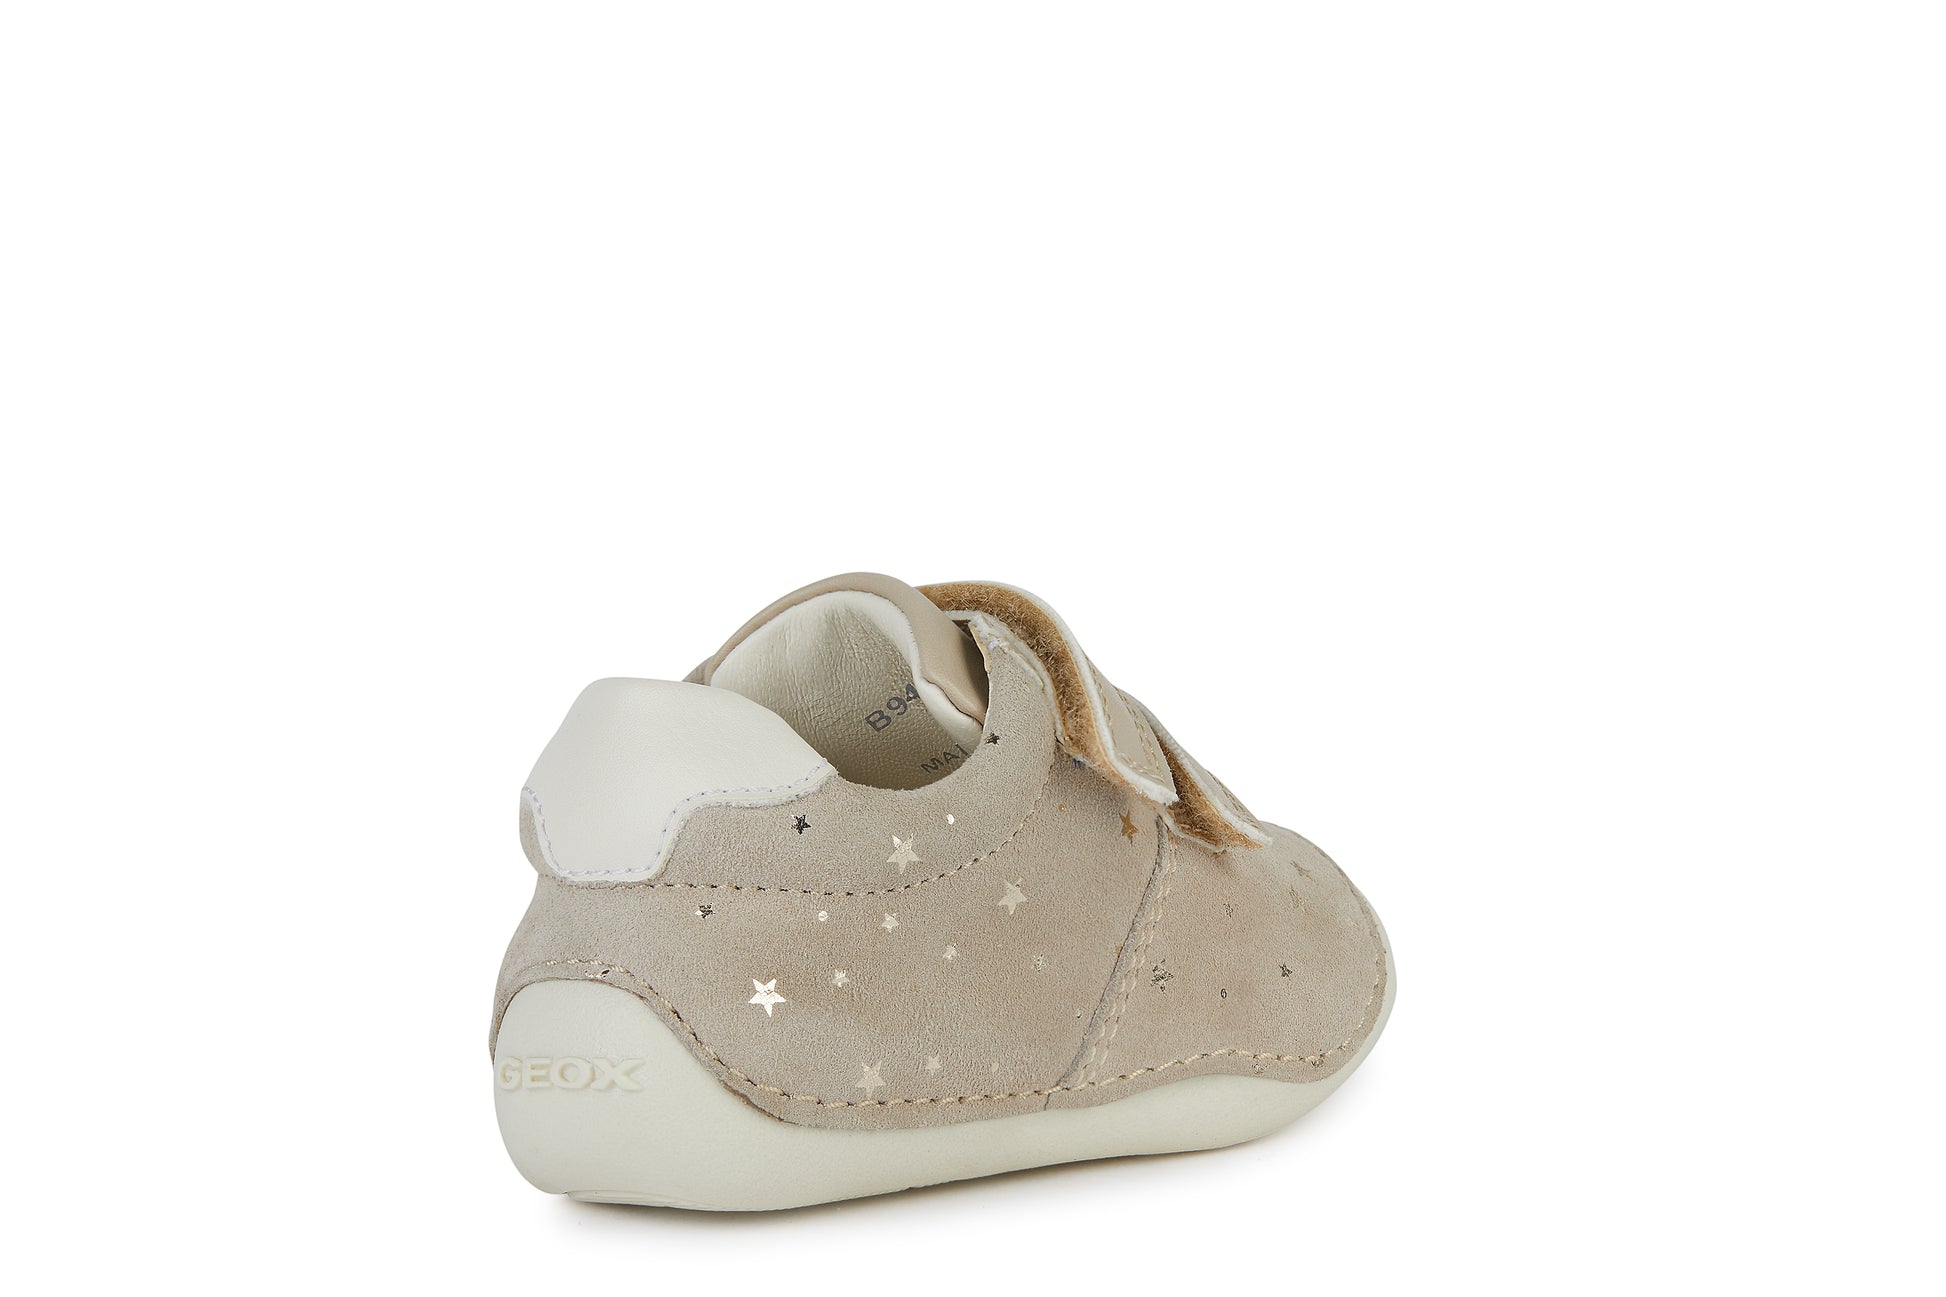 A girls pre walker by Geox, style B Tutim Girl, with toe bumper ,in beige suede with star detail and double velcro fastening. Angled view of right side.